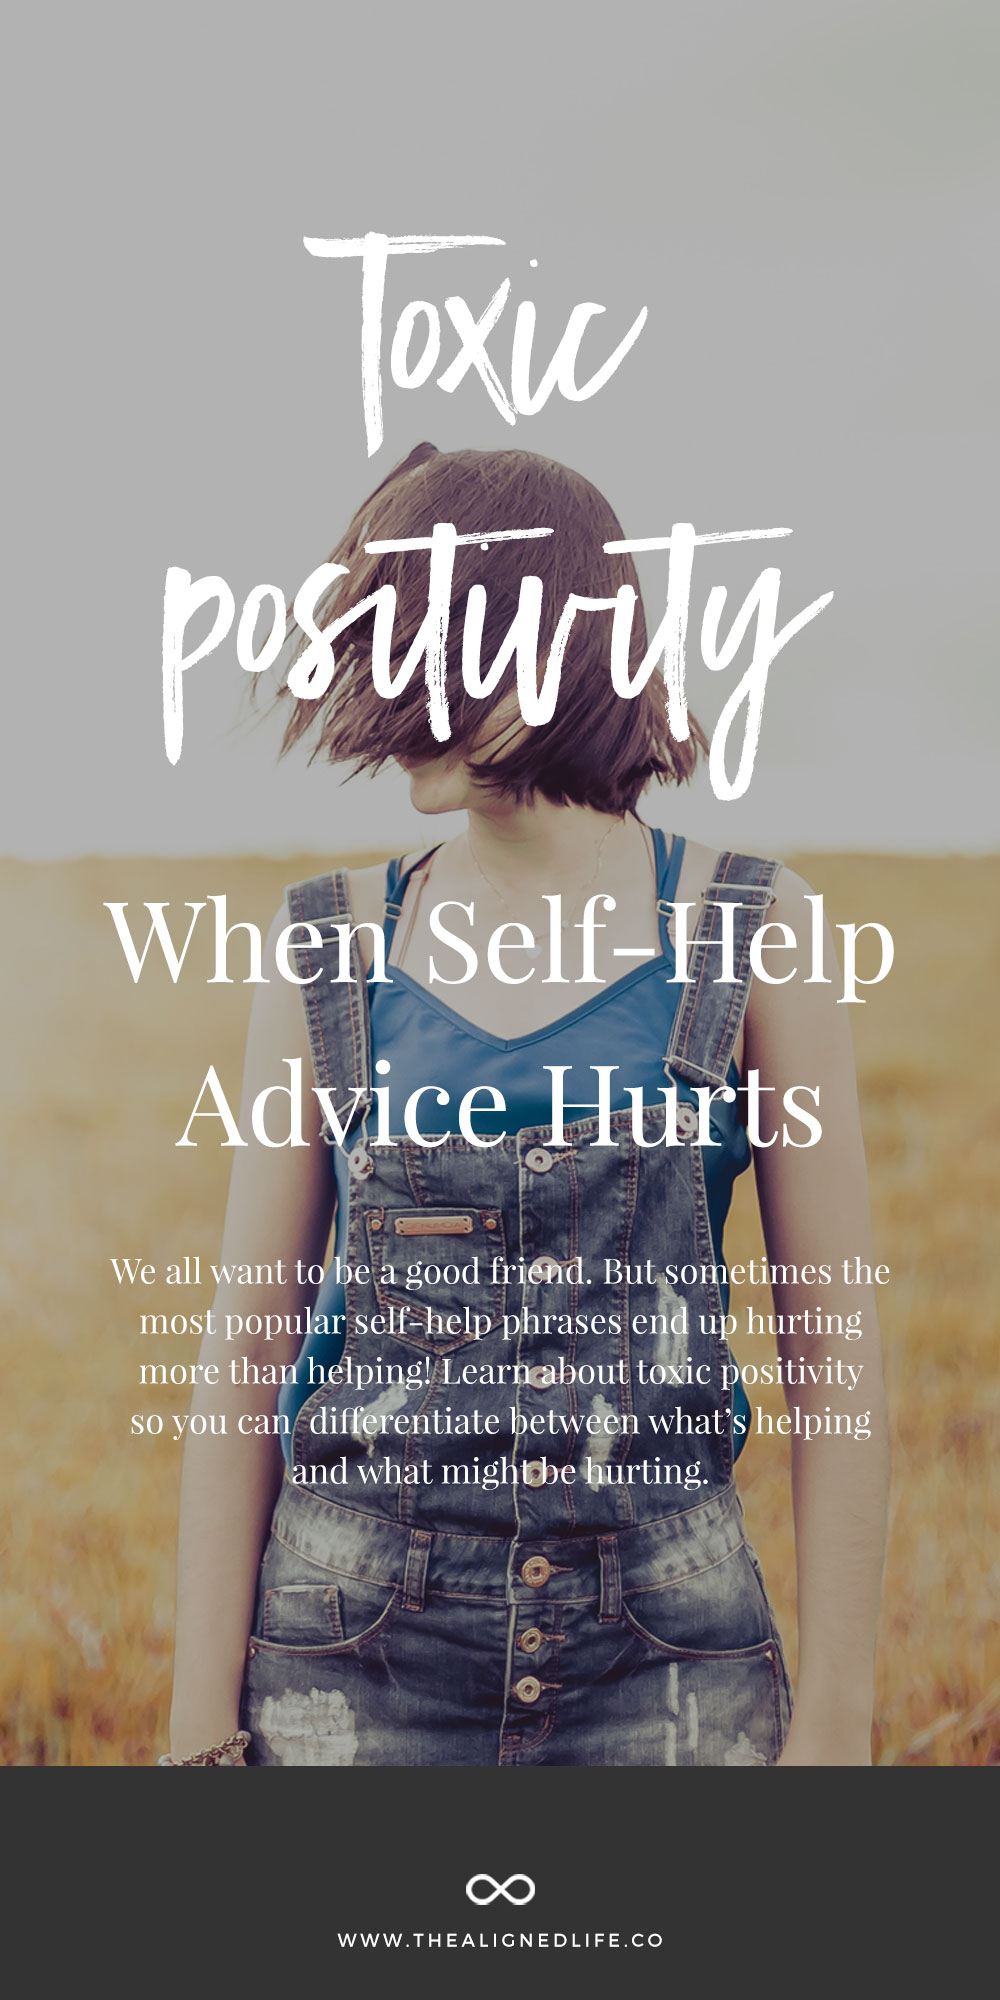 Toxic Positivity: When Self-Help Actually Hurts